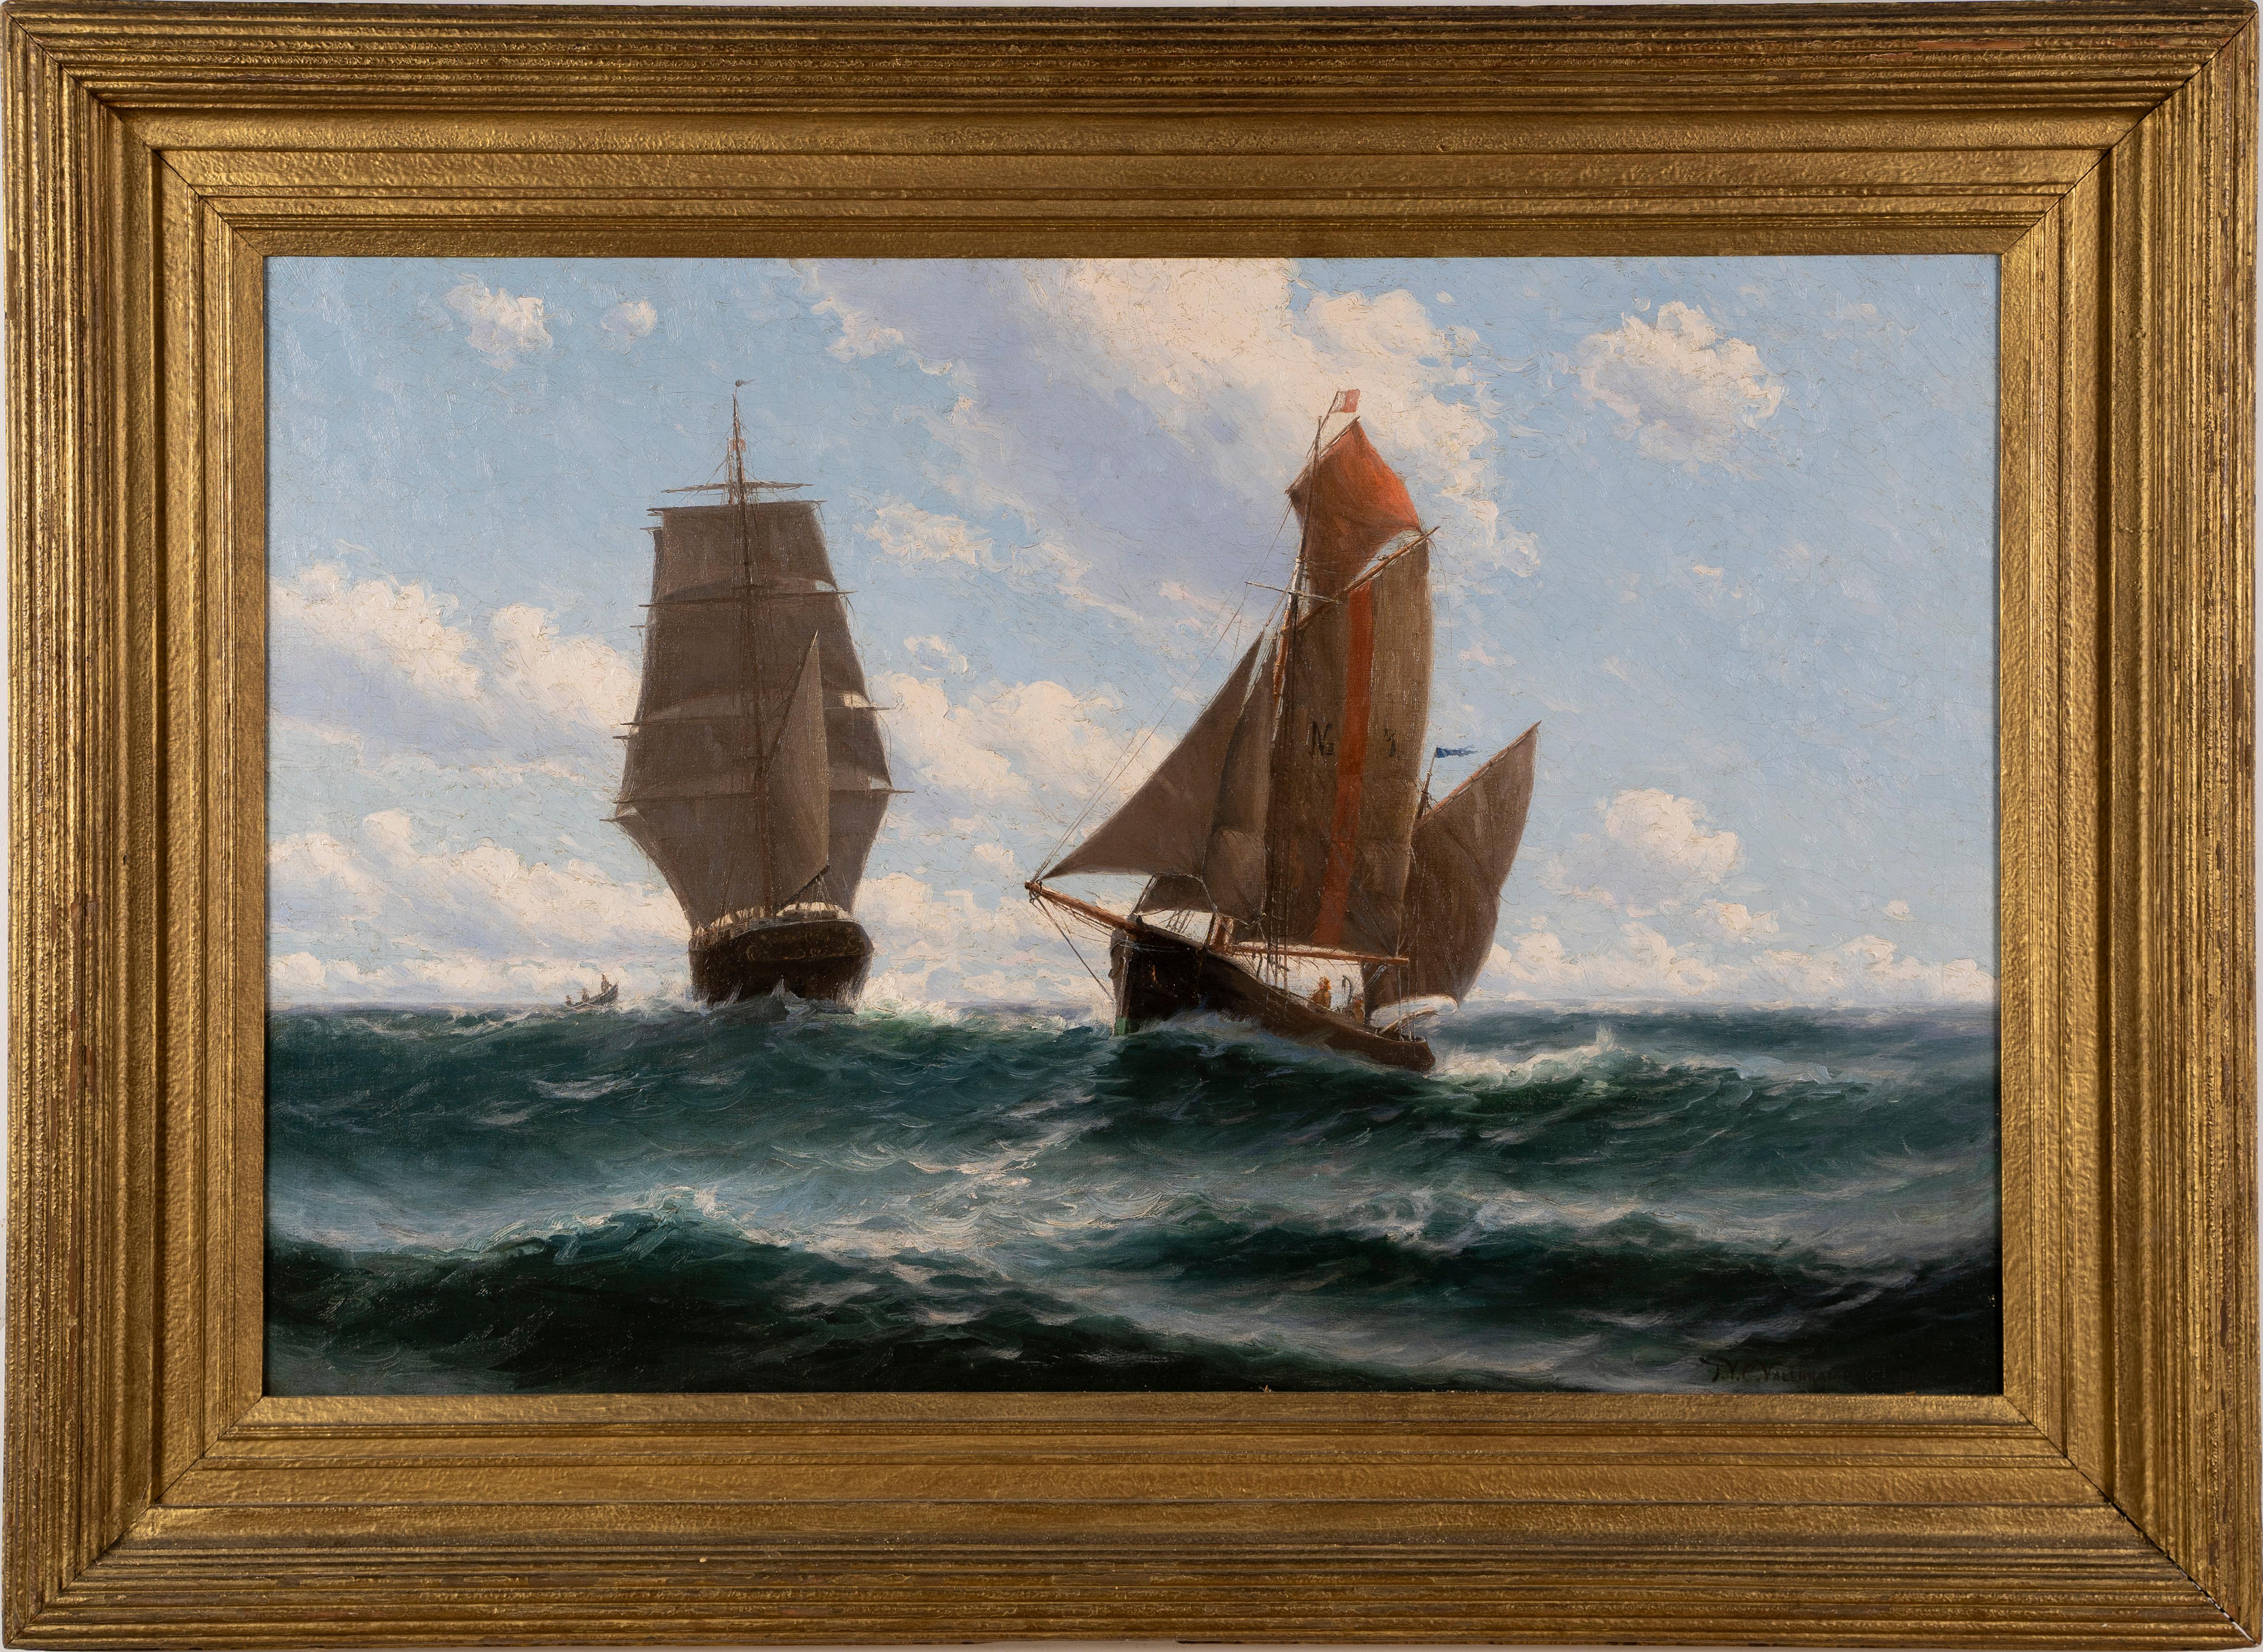 Antique American impressionist seascape painting by Theodore Victor Carl Valenkamph (1868 - 1924).  Oil on canvas, circa 1900.  Signed.  Image size 36L x 24H.  Housed in a period giltwood frame.